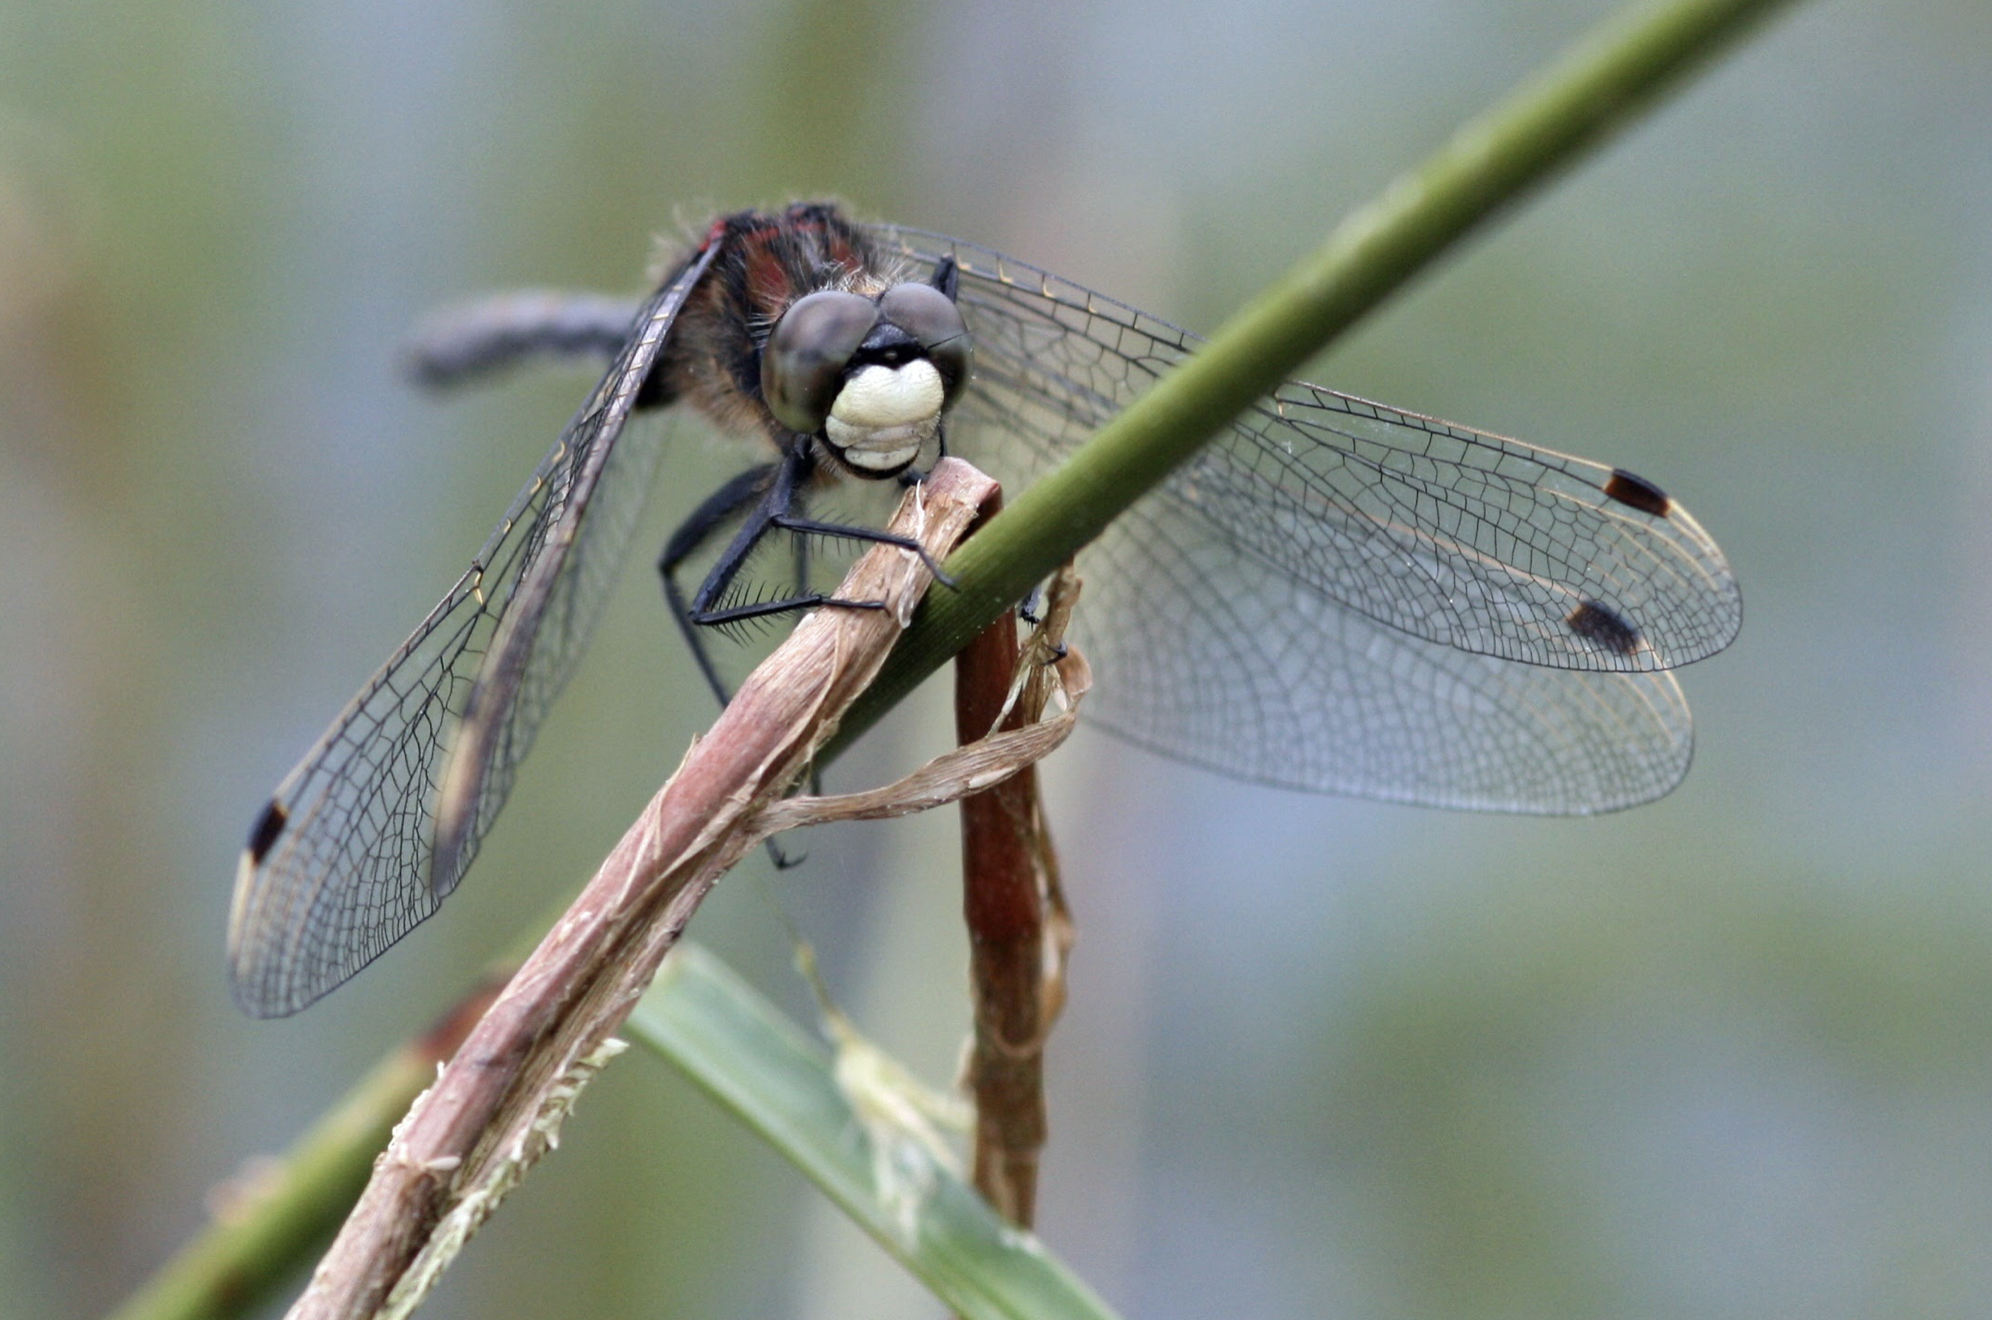 White Faced Darter (Copyright credit - Vicky Nall)